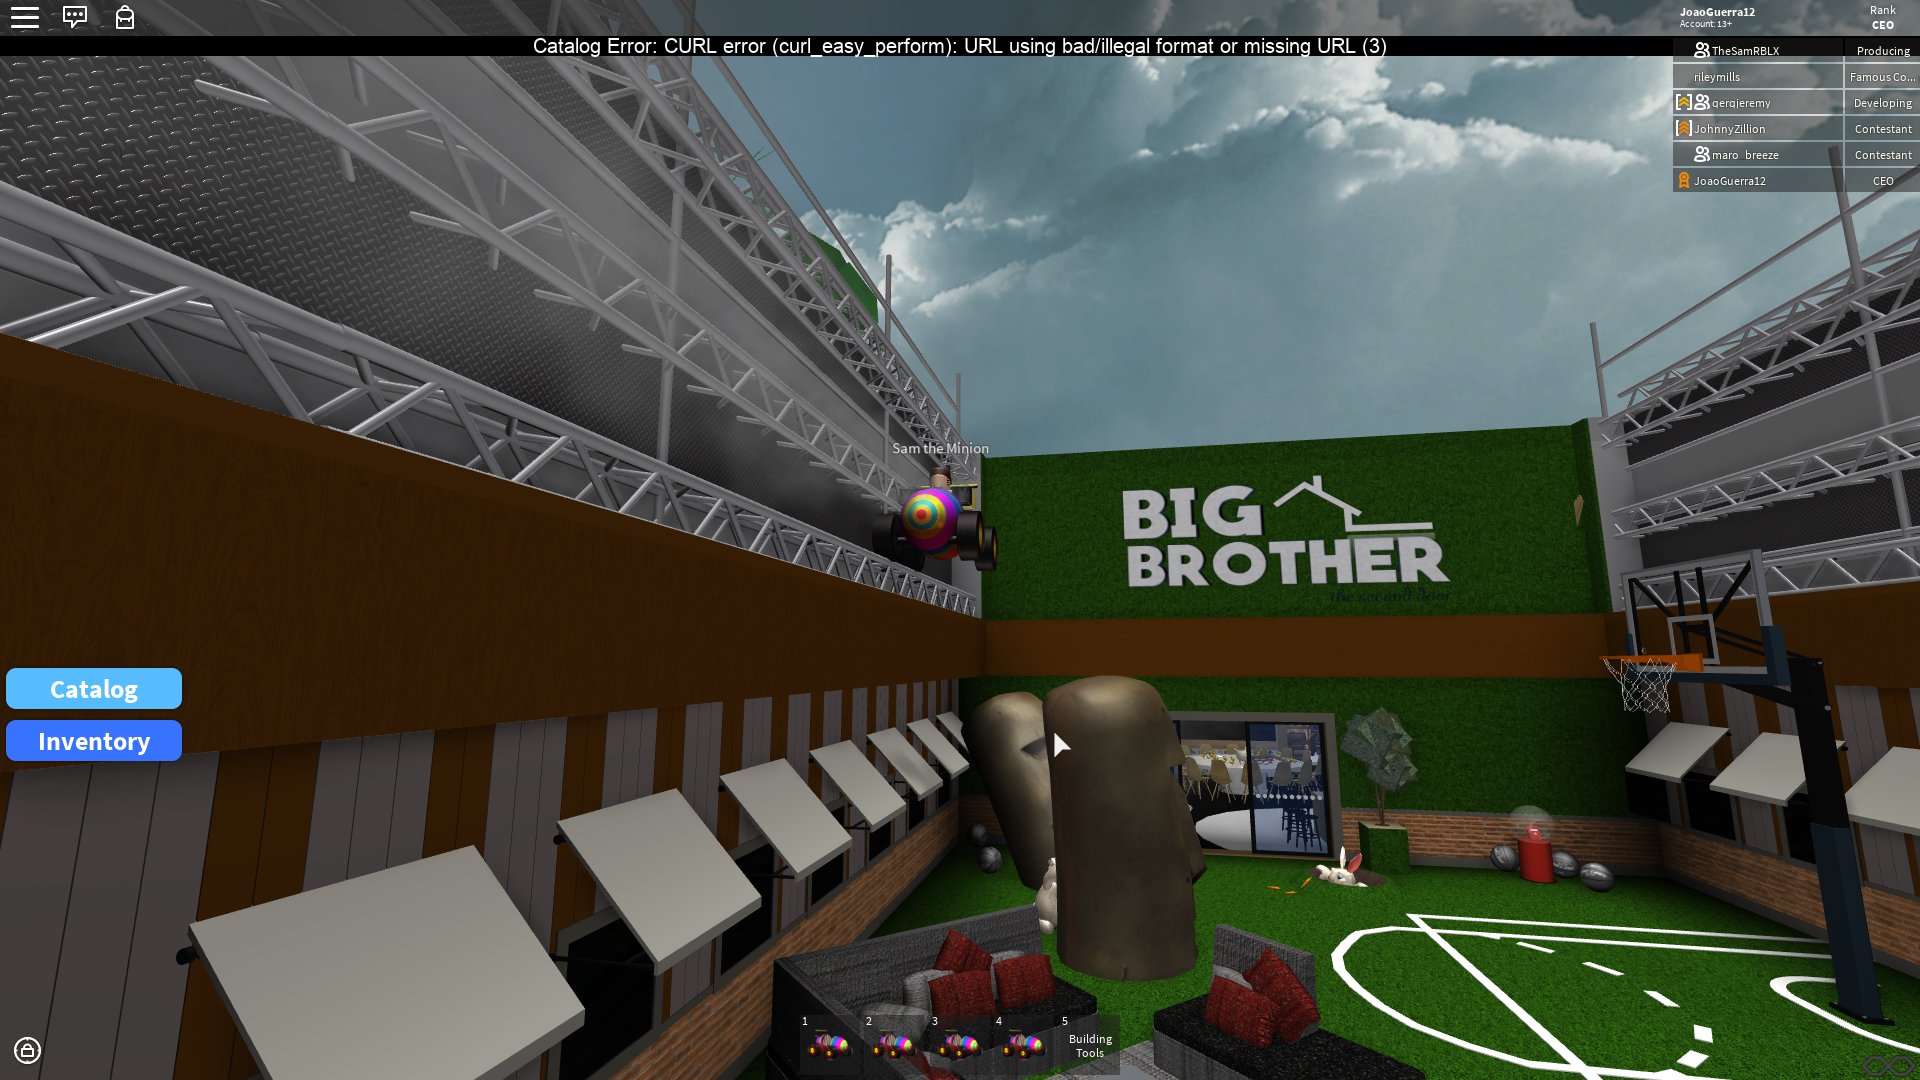 Big Brother The Second Door Tof On Twitter Highlights Of Today S Live Feeds Get Ready Because More Chaos Ensues Tomorrow As Bbegghunt Begins Wednesday - big brother in roblox